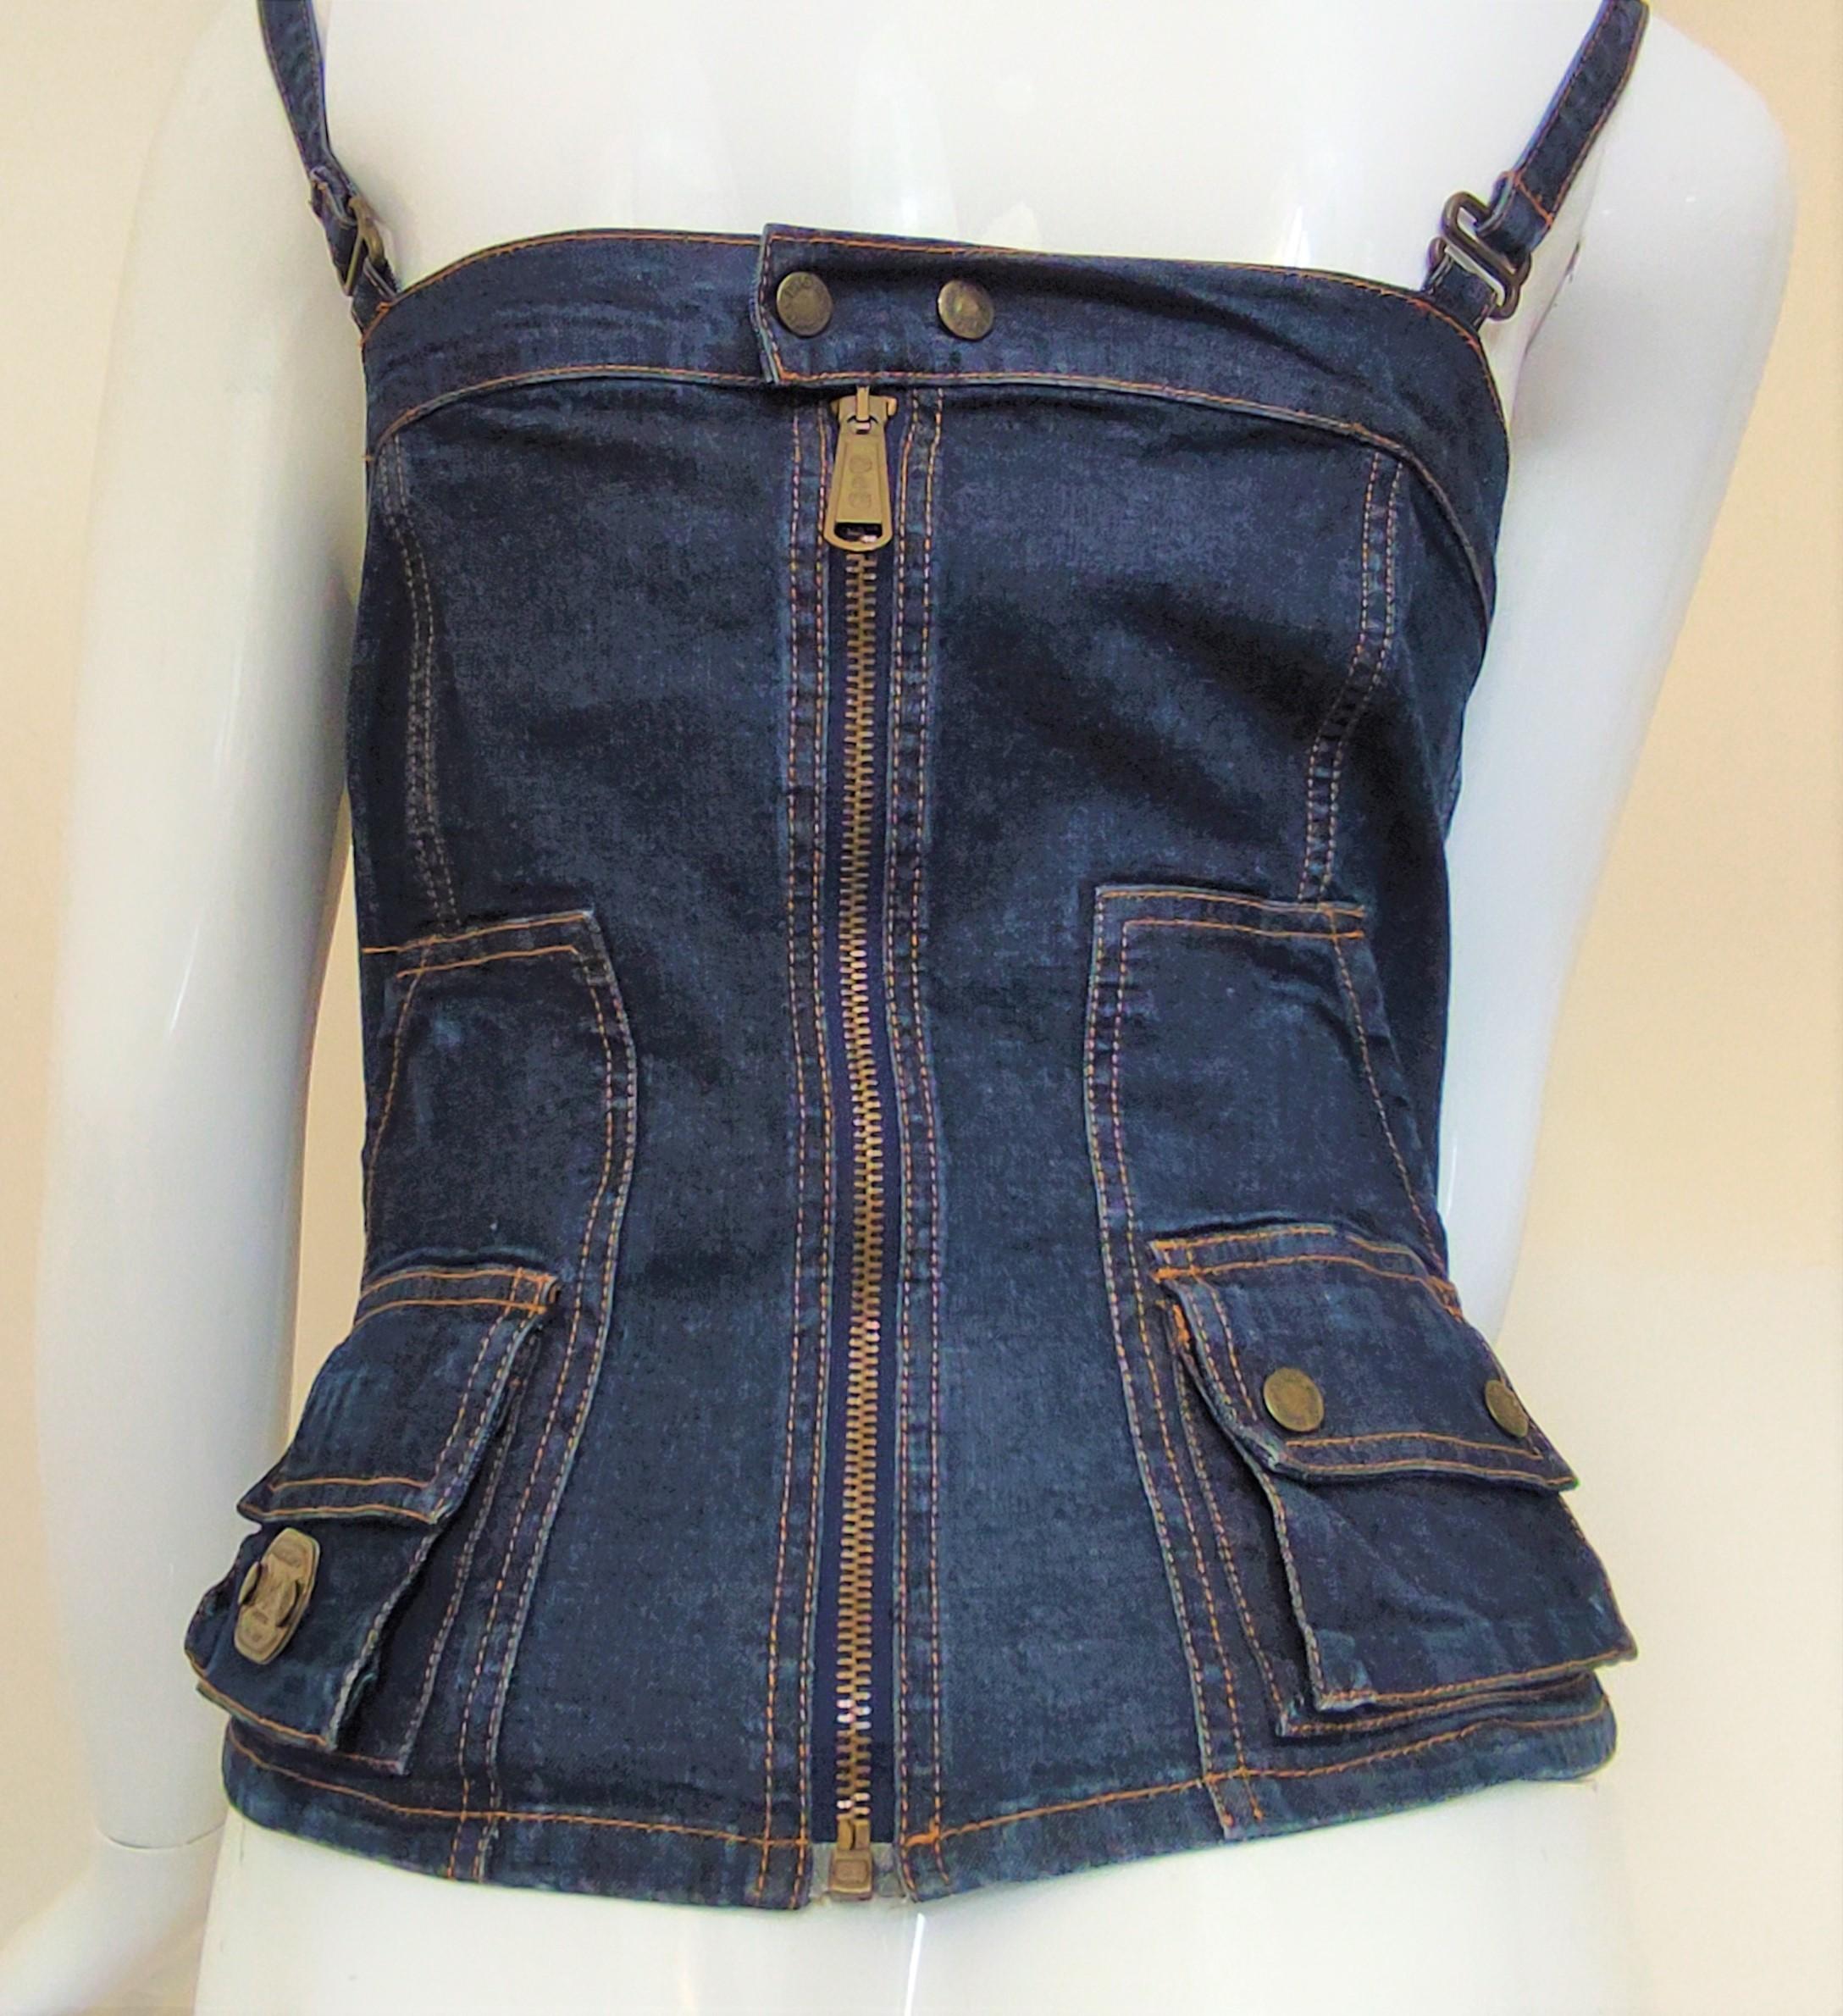 Dolce and Gabbana corset from the 90s!
Denim cargo style!

VERY GOOD condition!
Size: XS.
Length with straps: 50 cm /  19.7 inch
Armpit to armpit: 37 cm /  14.6 inch
Waist: 33 cm /  13 inch

Made in Italy!
